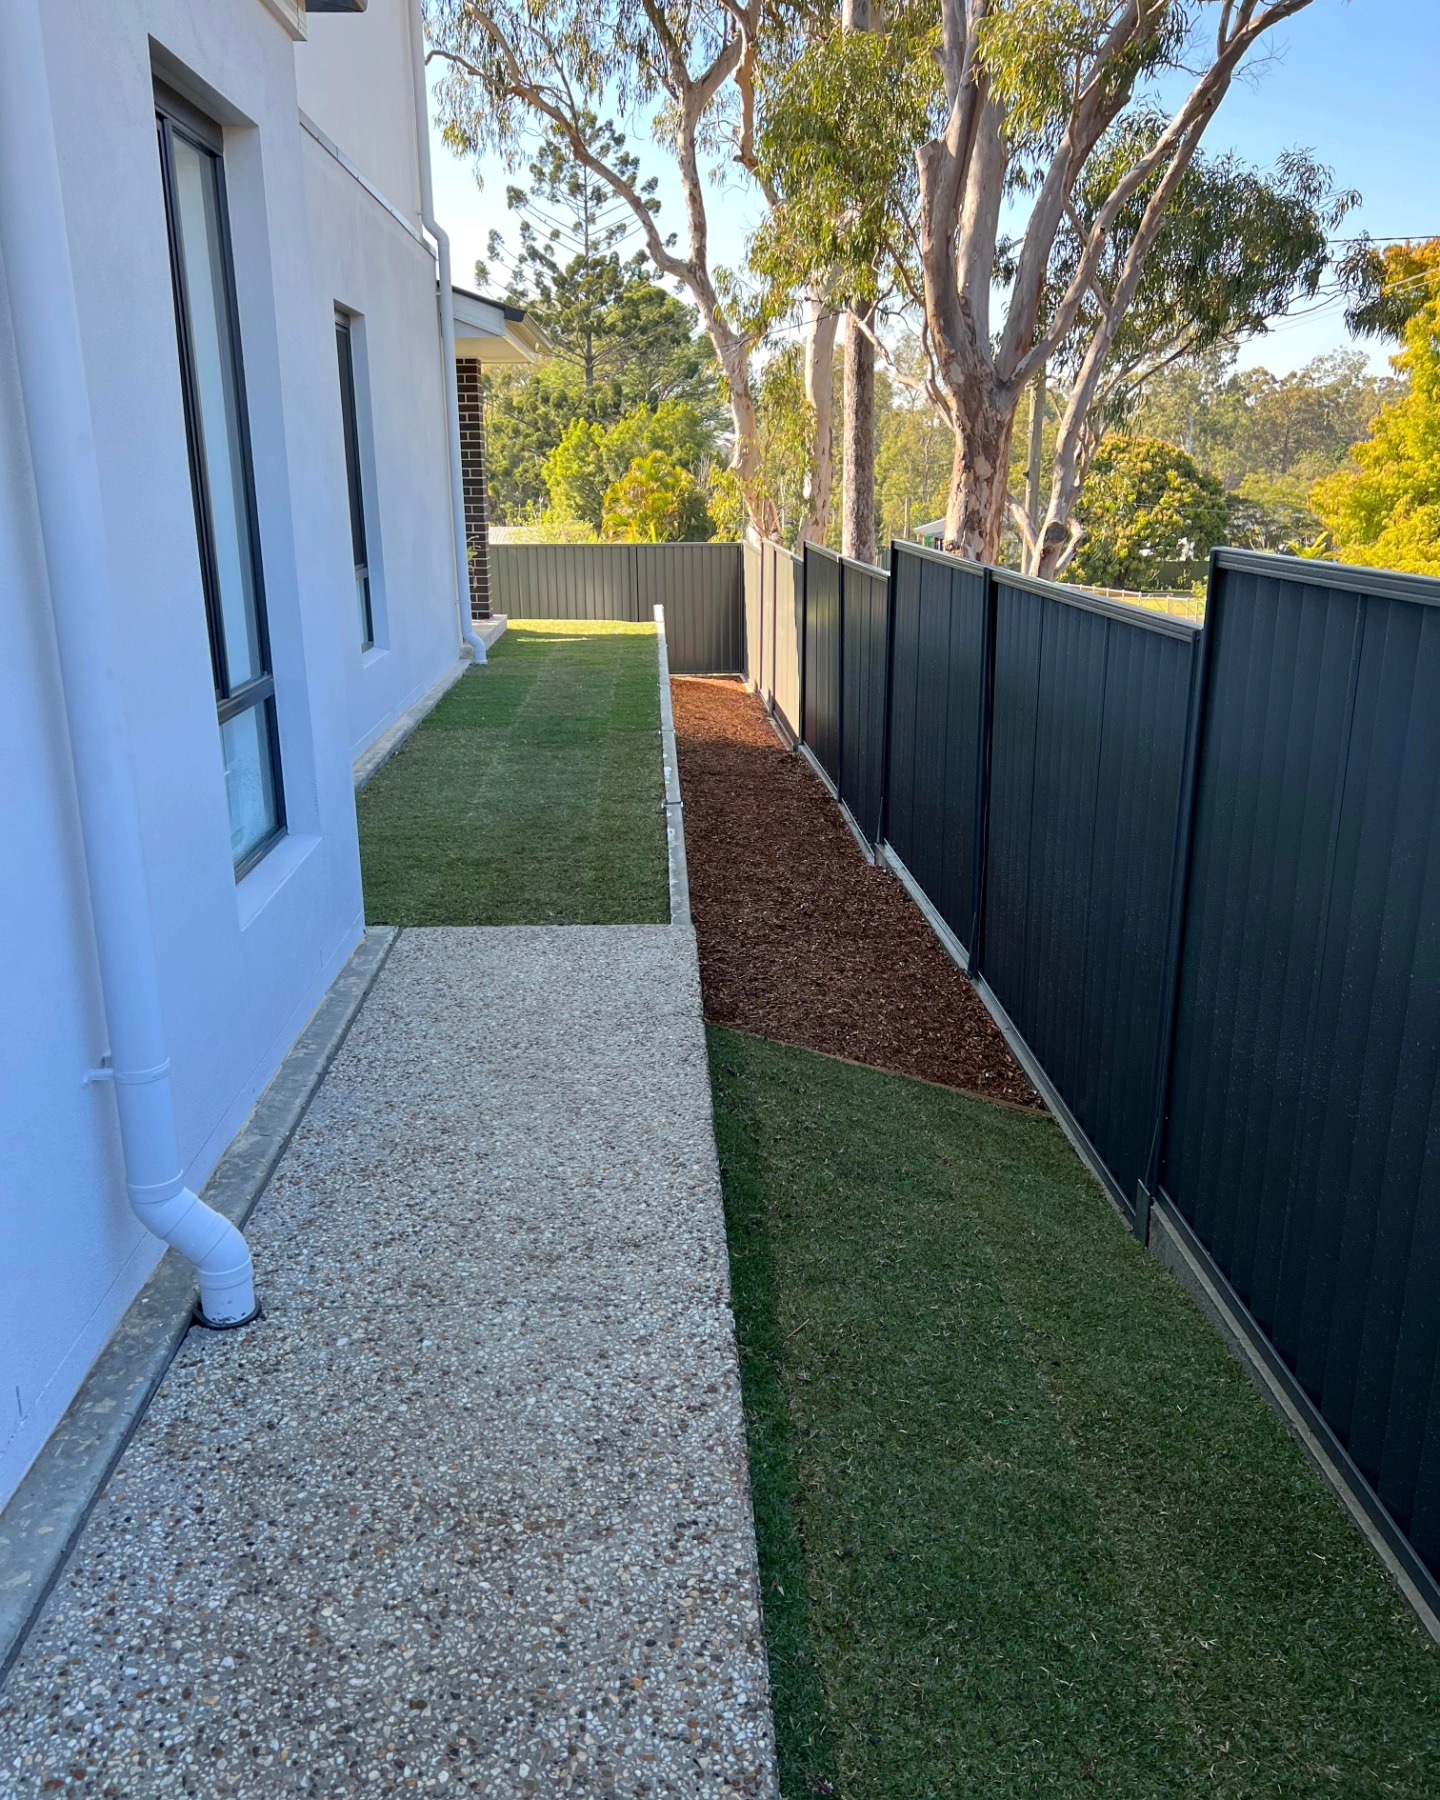 Retaining and turf job completed on a large slope with entire access completed (8)